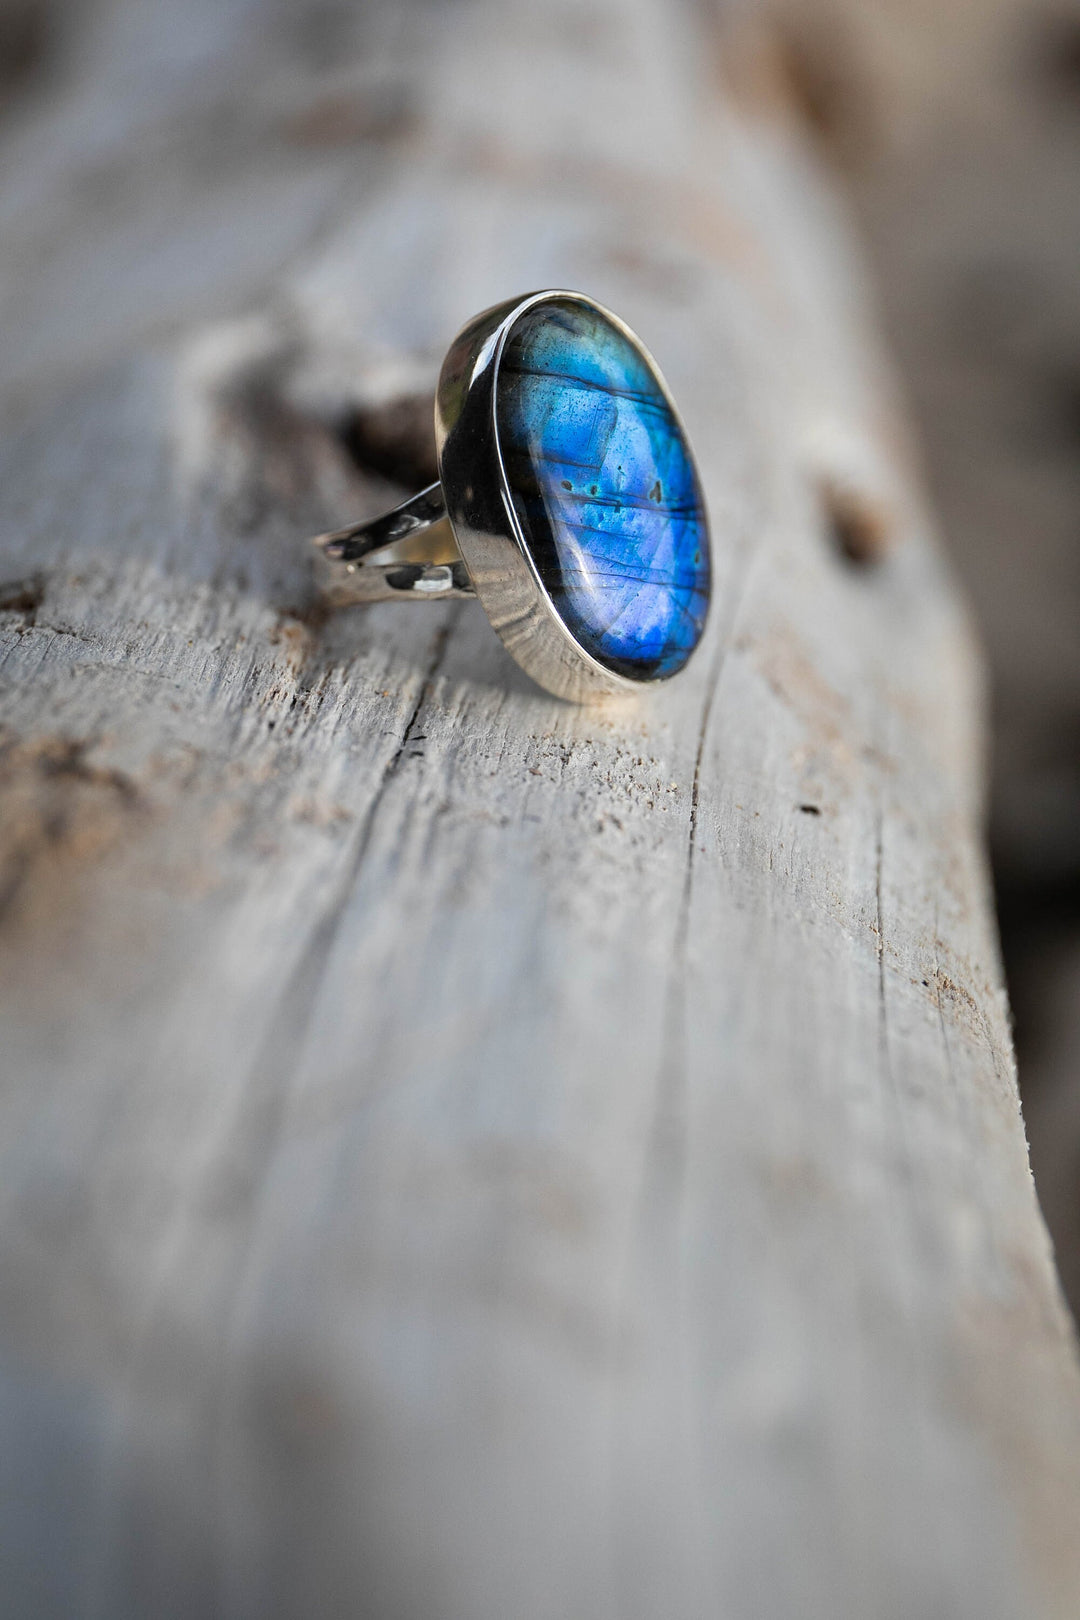 Oval Labradorite Ring set in Beaten Sterling Silver Band - Size 9 US